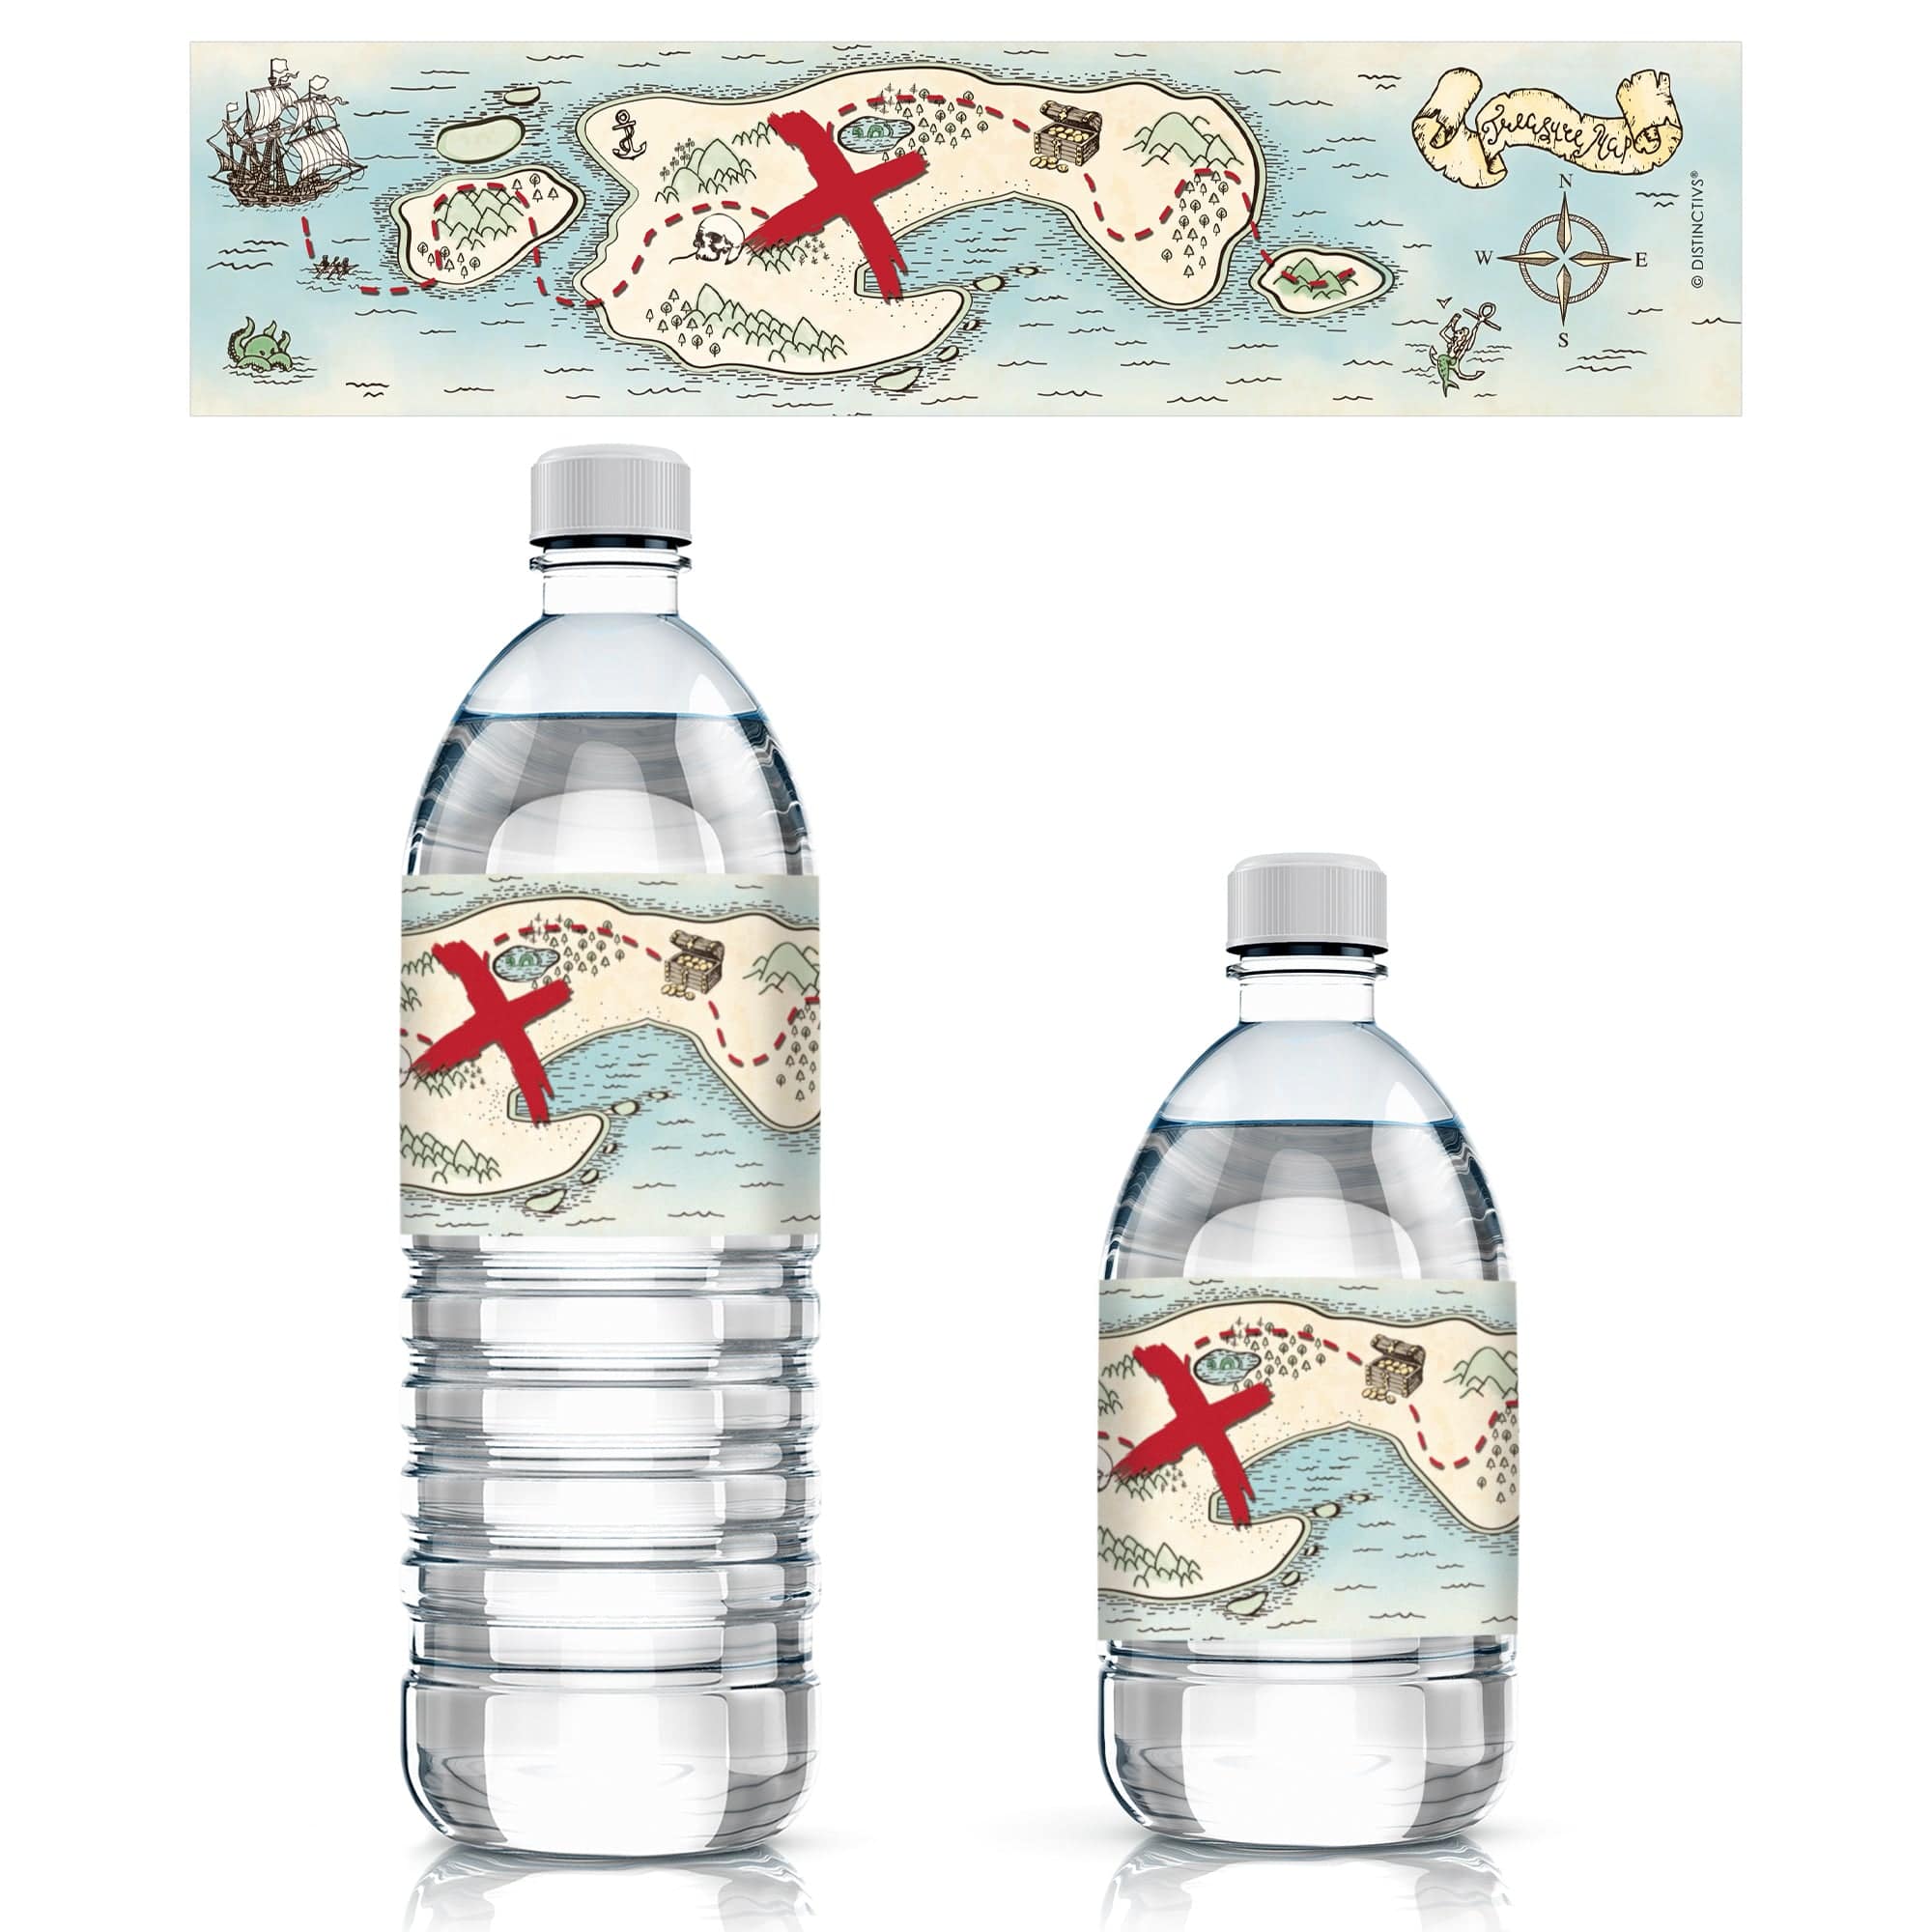 Pirate Party Water Bottle Labels, Treasure Map Theme - 24 Stickers